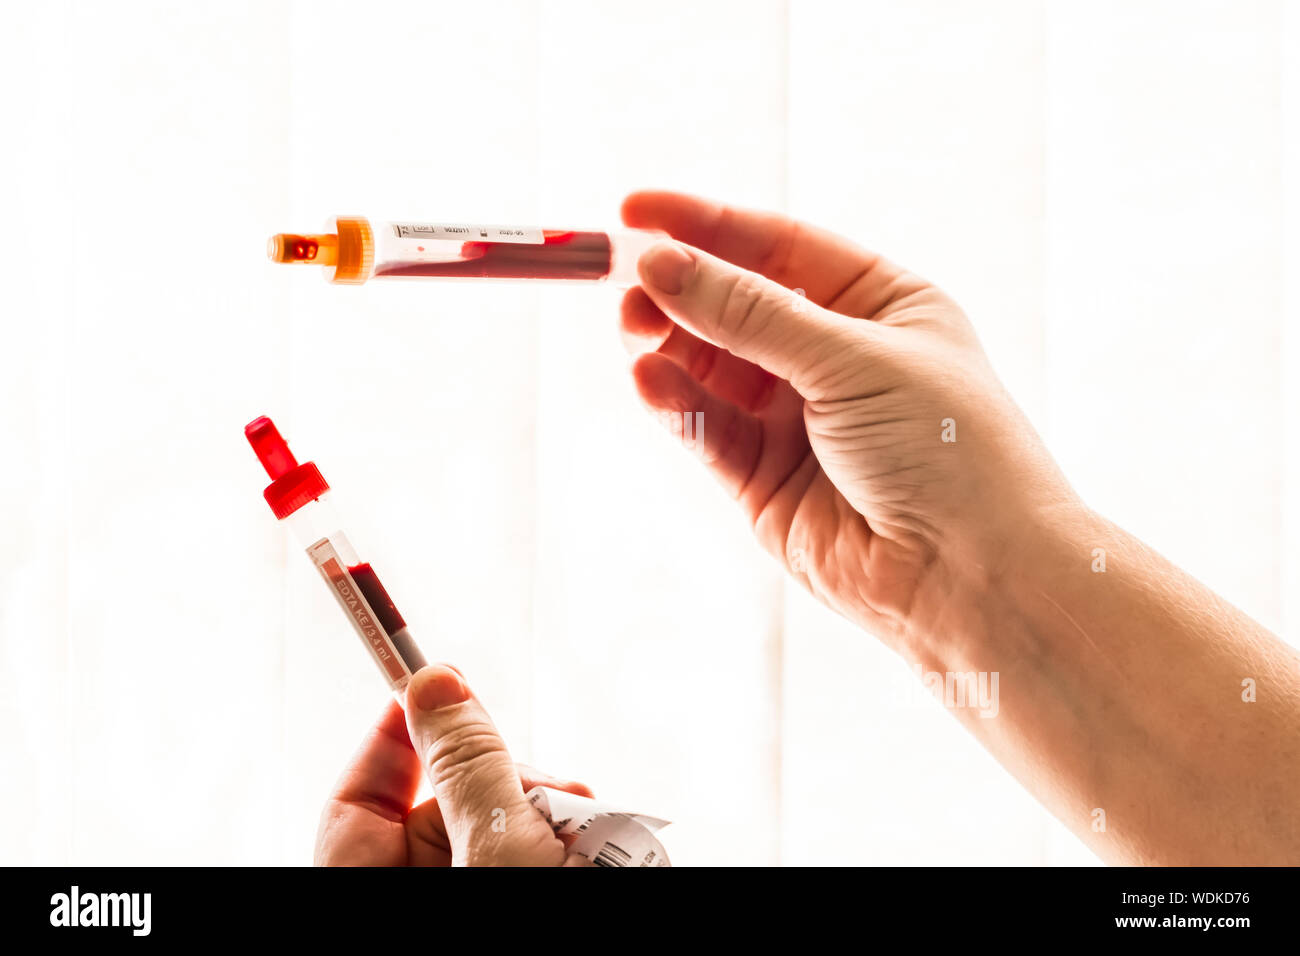 Phials, vials, or tubes of blood samples being held up against a window. Stock Photo